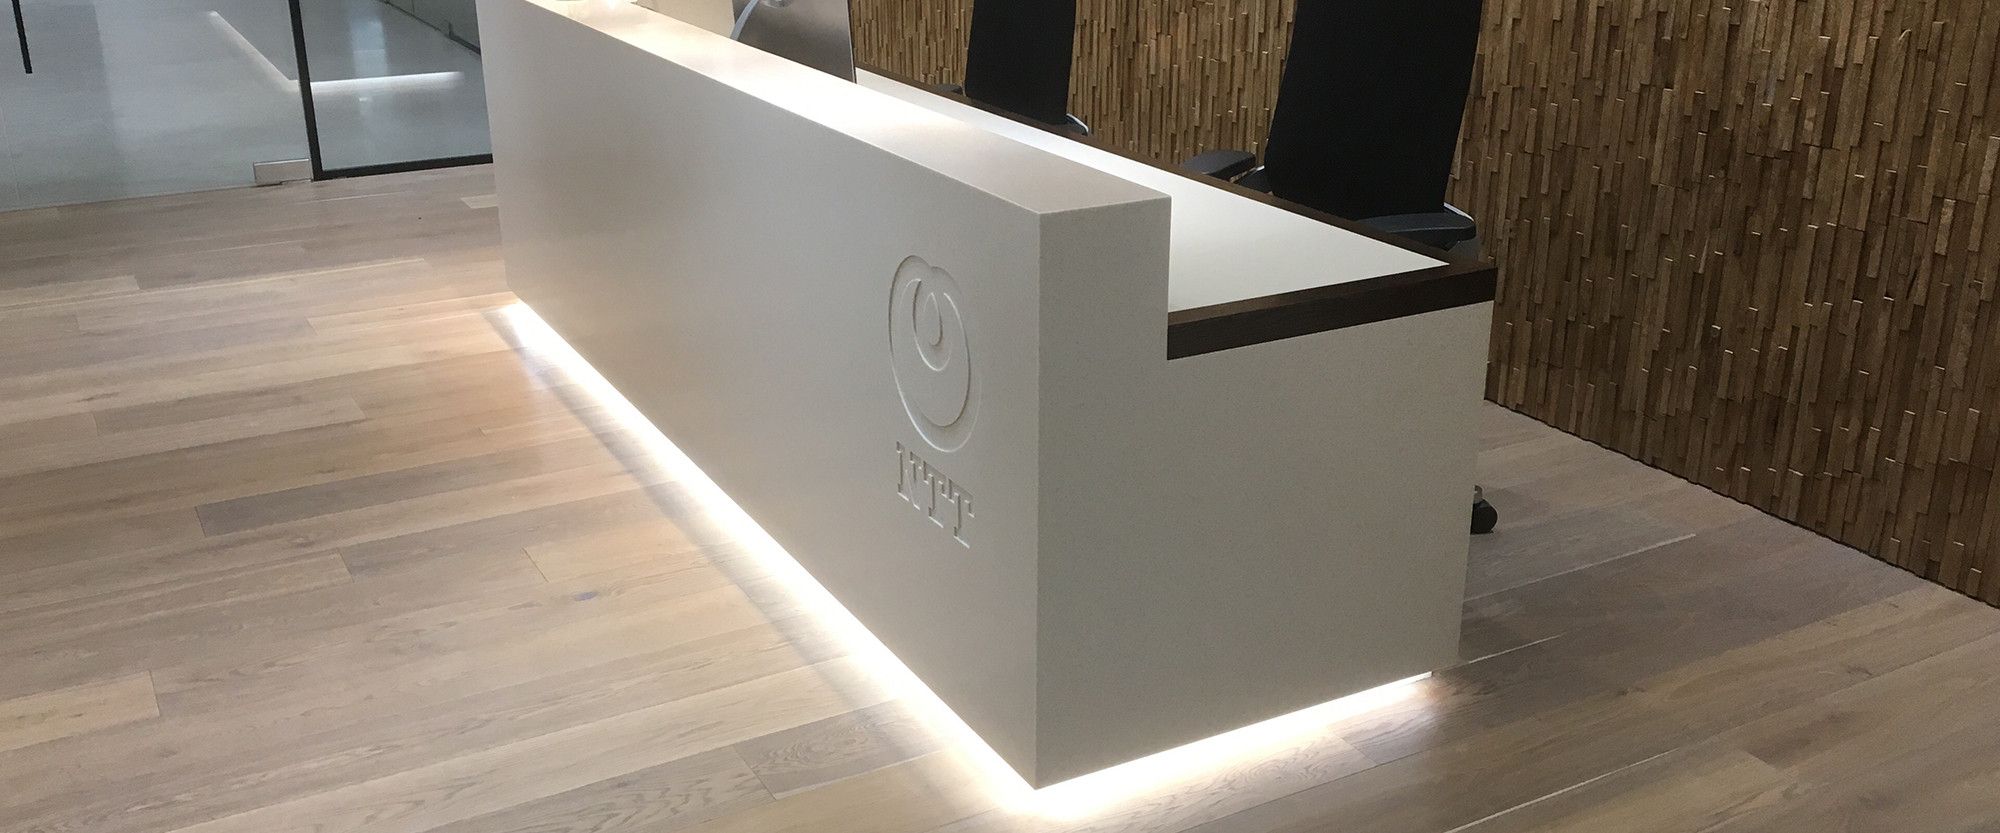 Reception area desk signage for Japanese technology company NTT. Internal signage and welcome areas play a key role extending the brand from outside to inside.